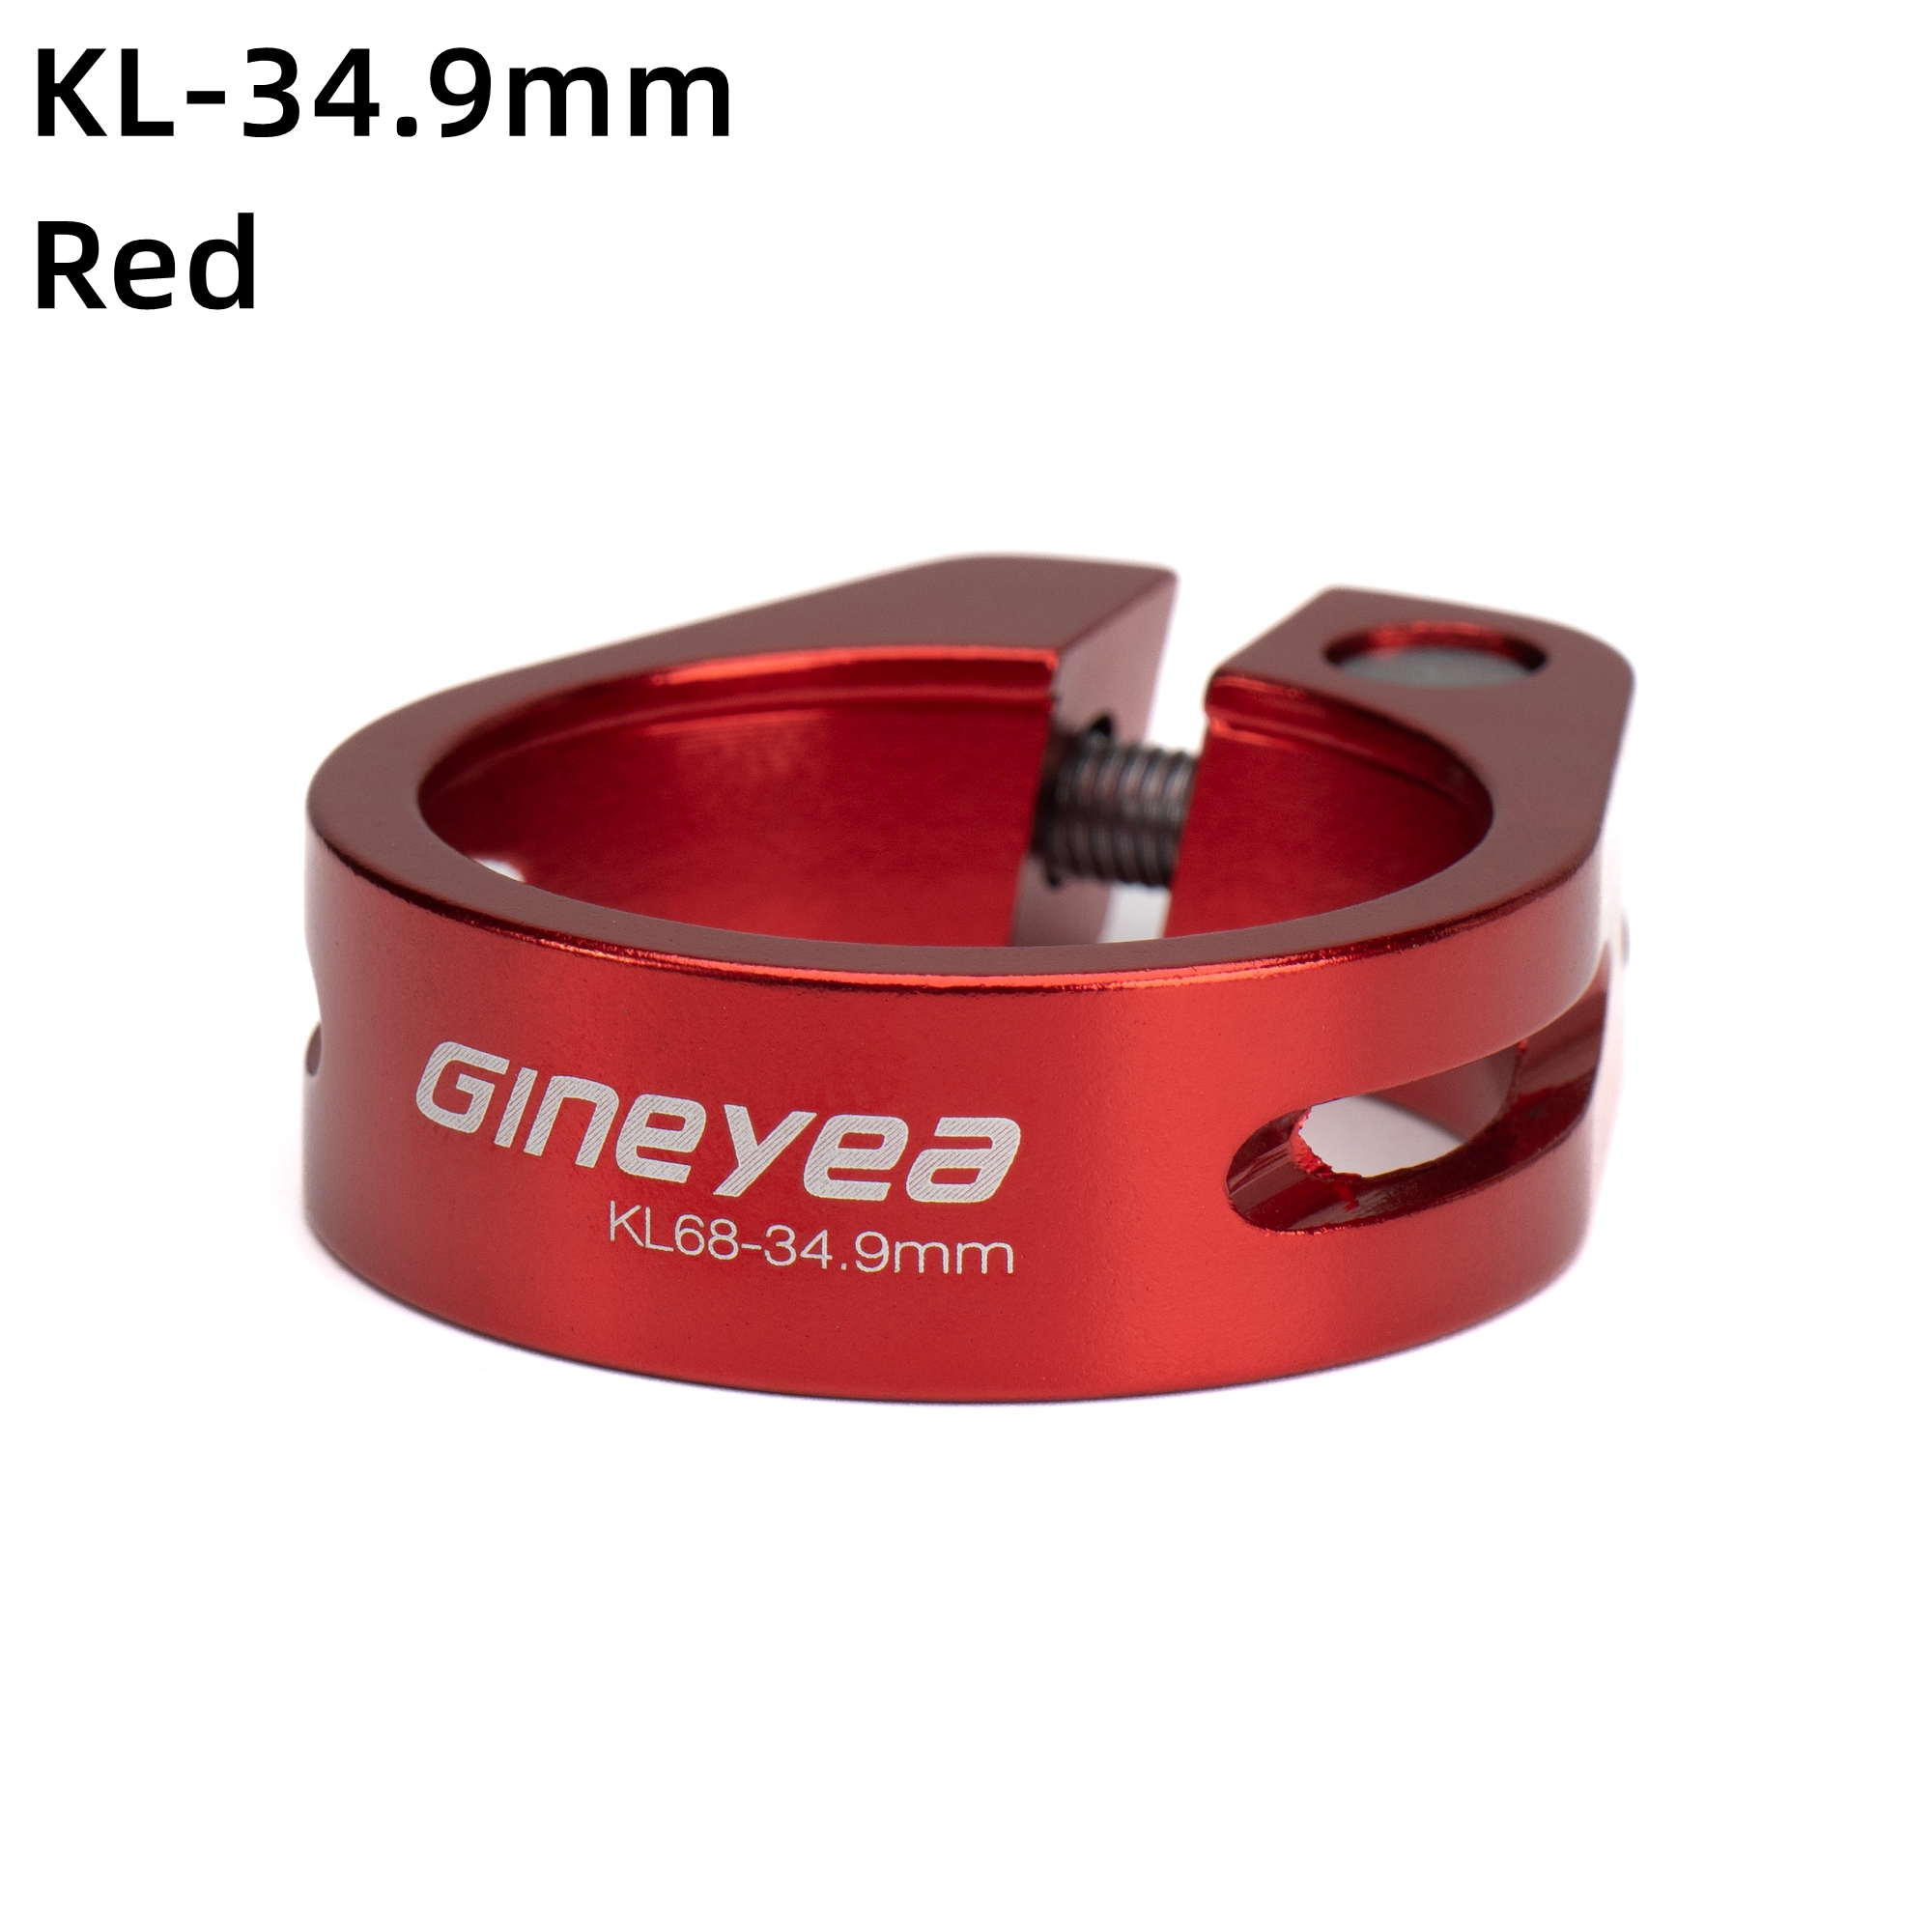 34.9mm red